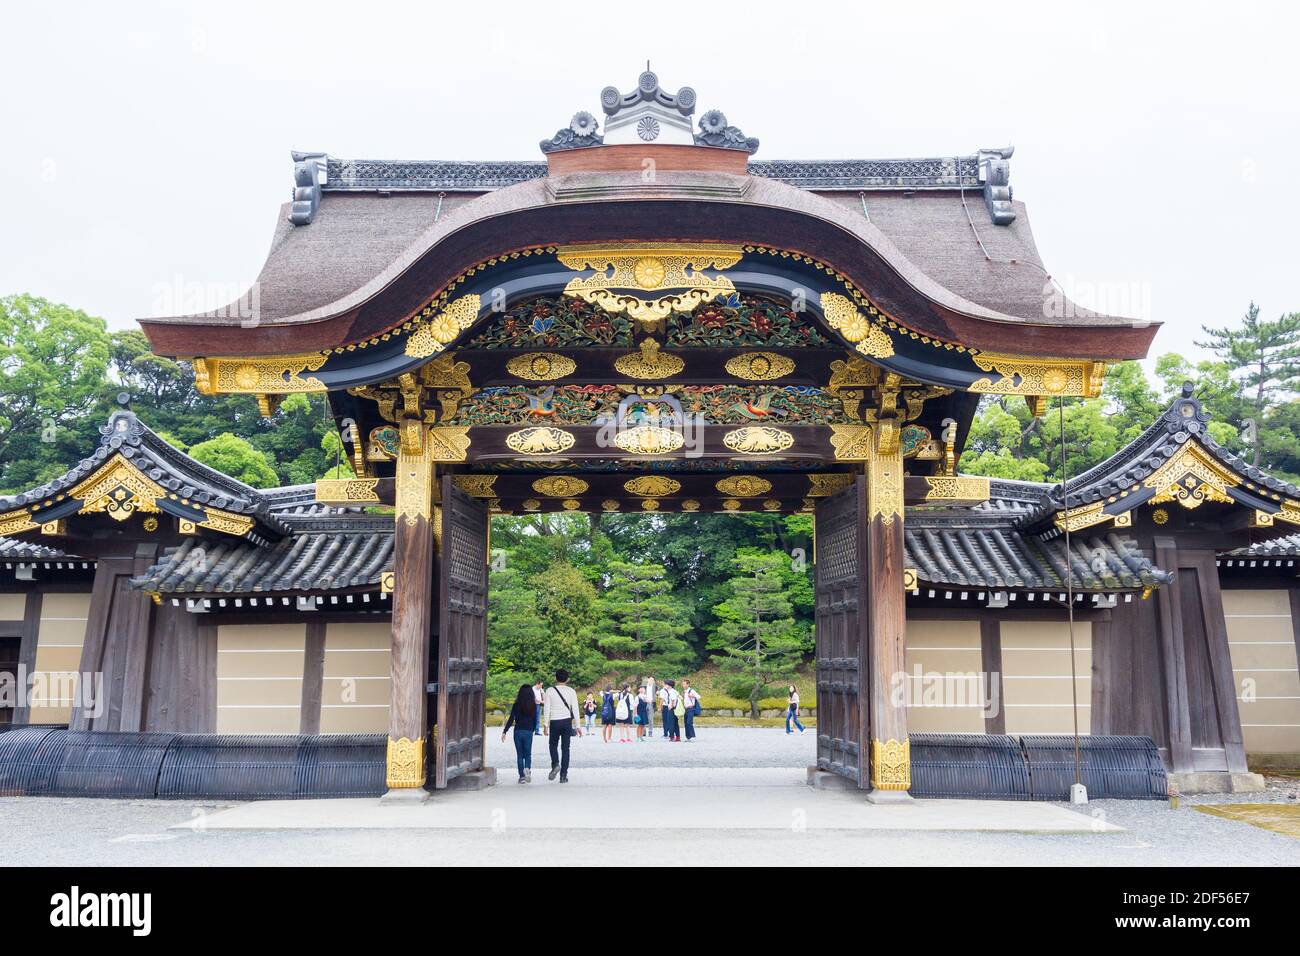 Inside the Kyoto Imperial Palace grounds in Kyoto, Japan Stock Photo